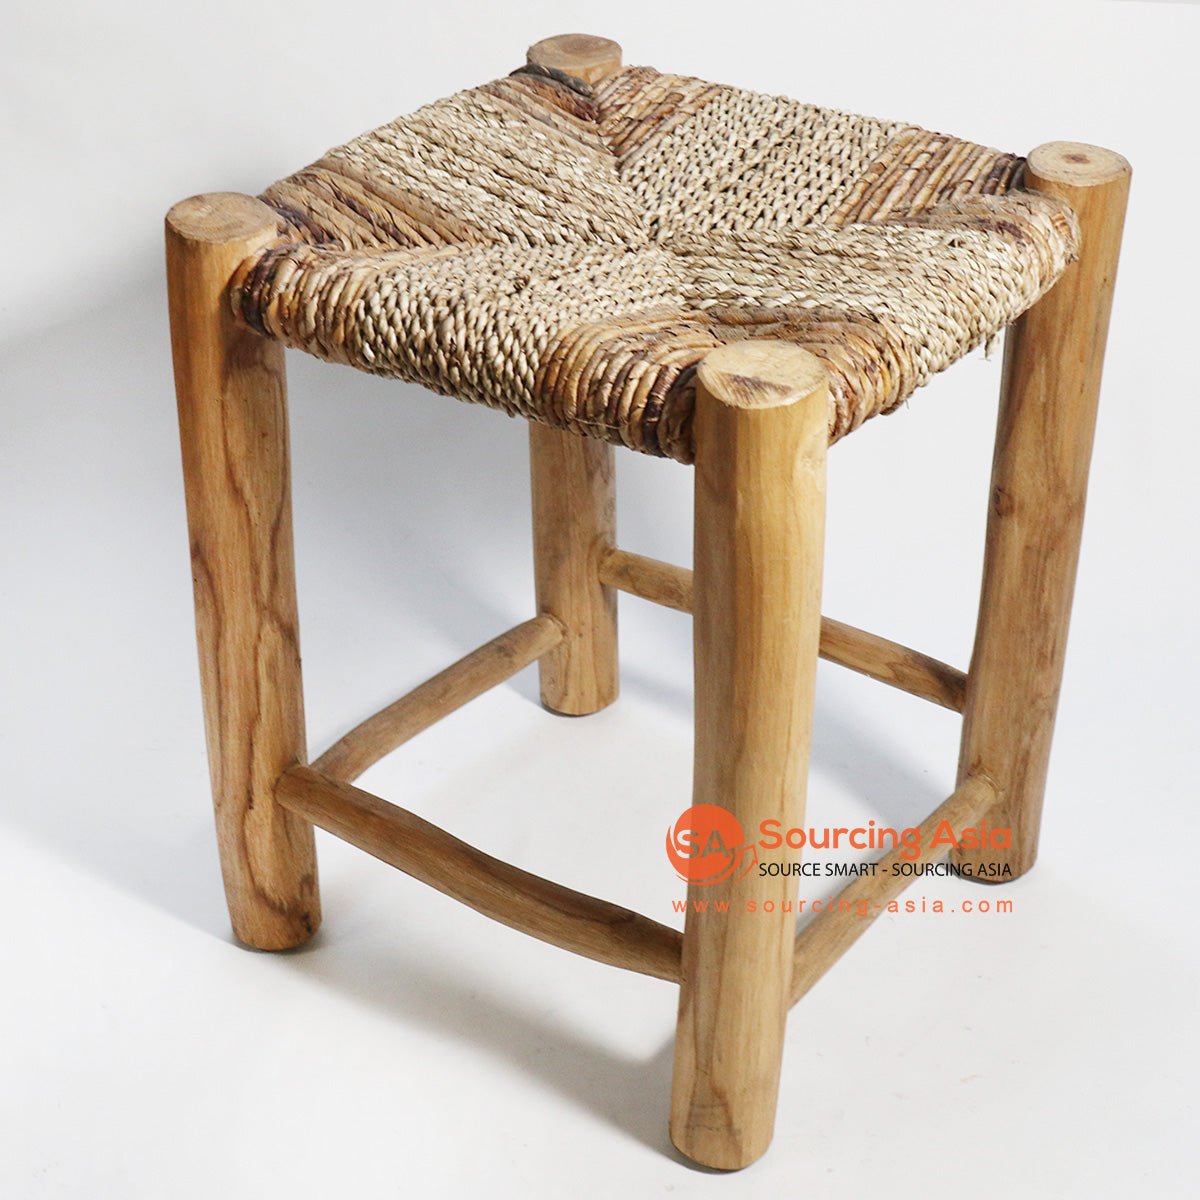 HBSC155 NATURAL SEAGRASS SQUARE STOOL